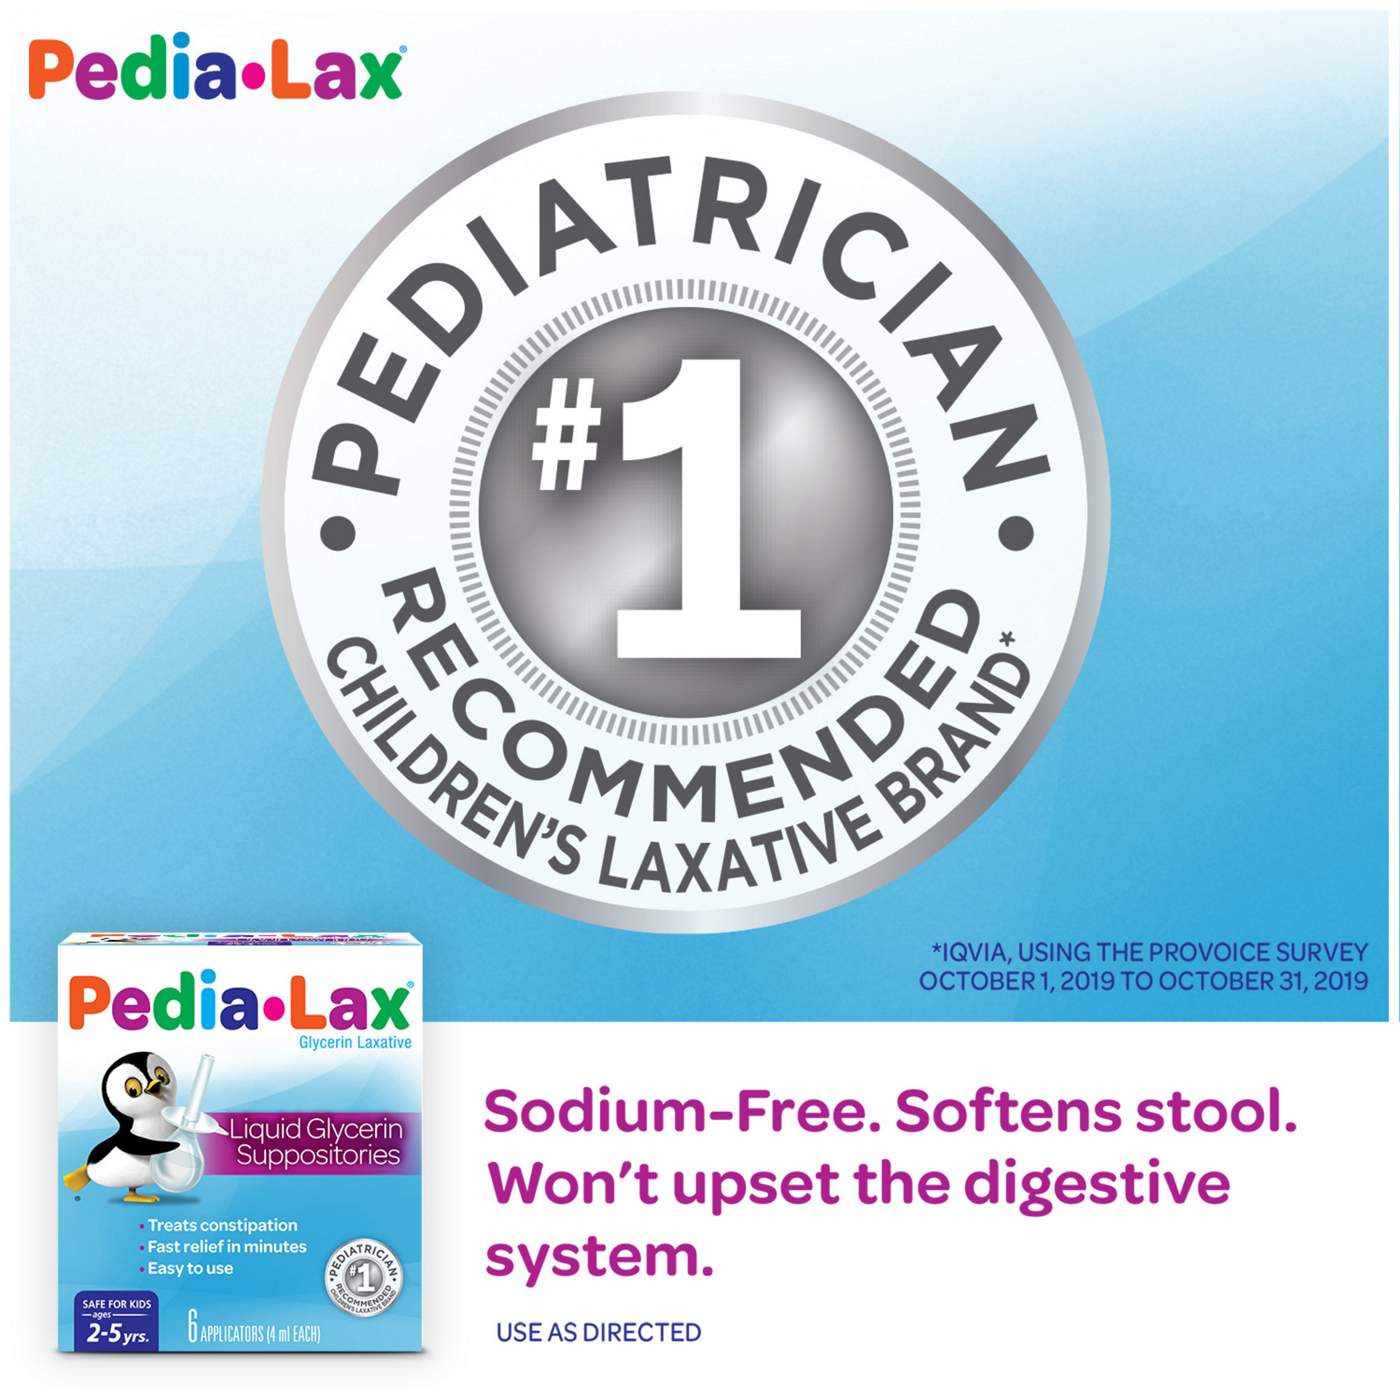 Pedia-Lax Laxative Glycerin Suppositories; image 3 of 5